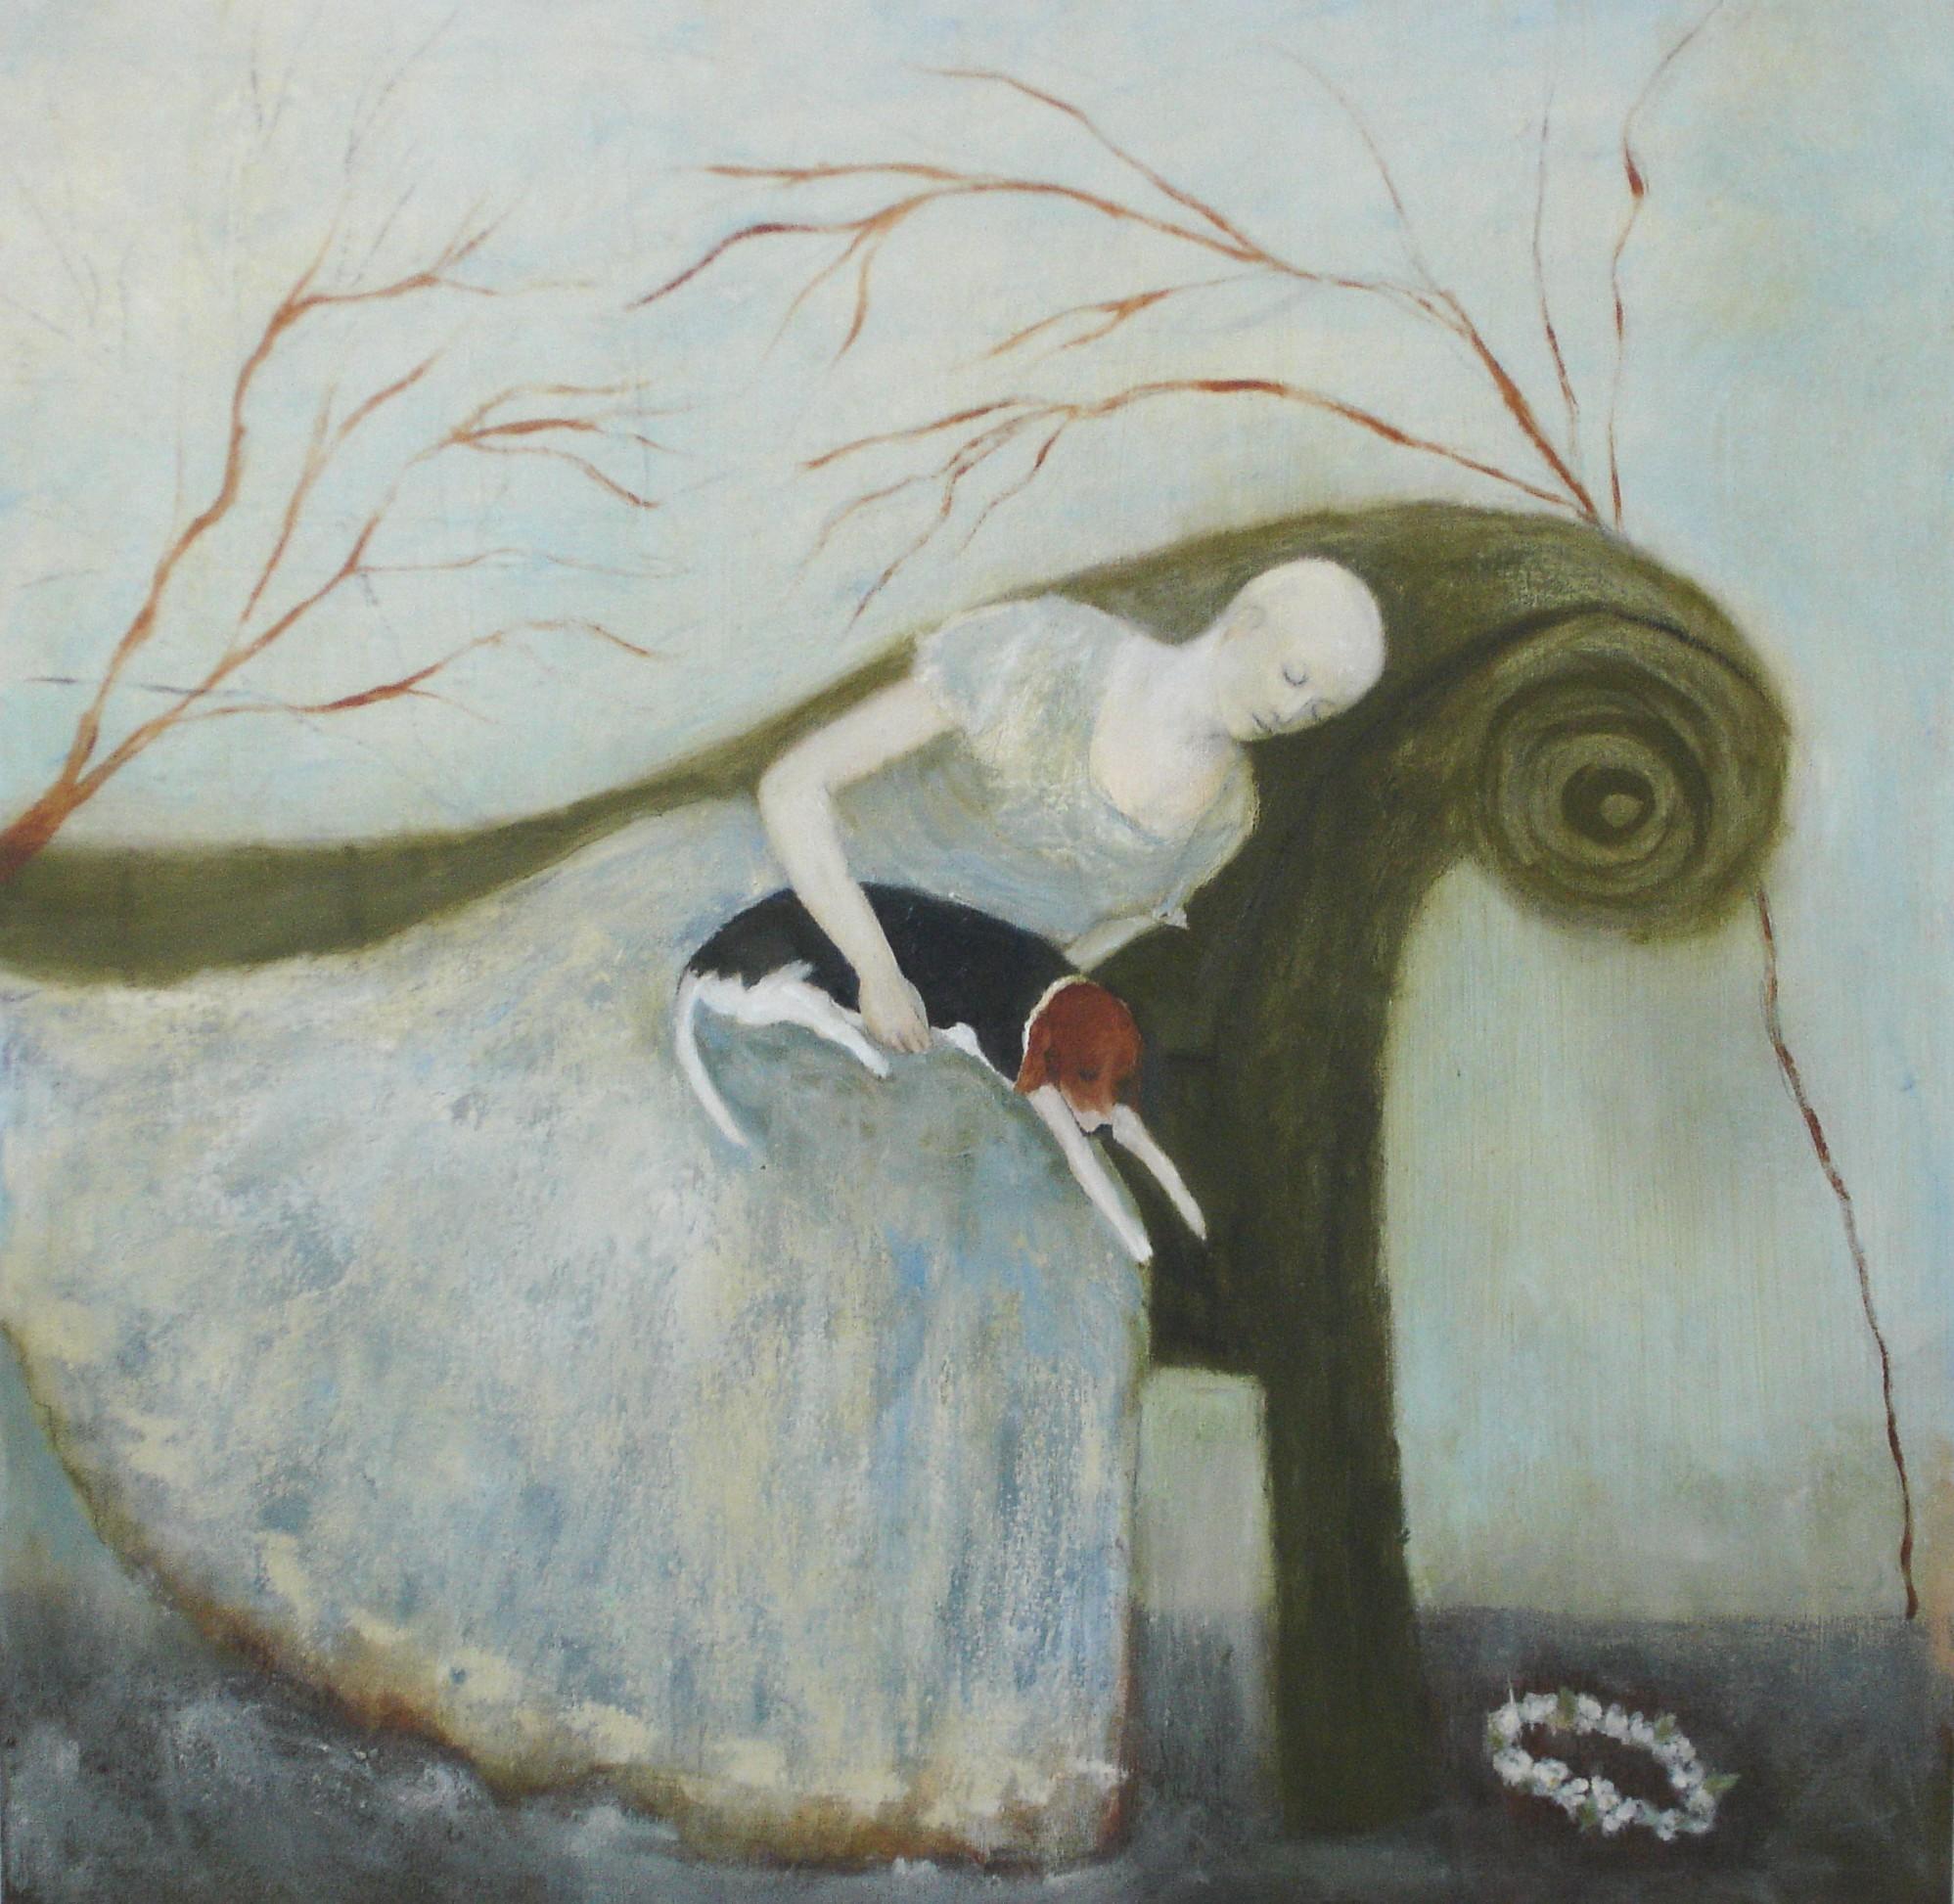  The Contract, Everywoman, protagonist, dog painting , feminine archetypes - Black Animal Painting by Jeanie Tomanek